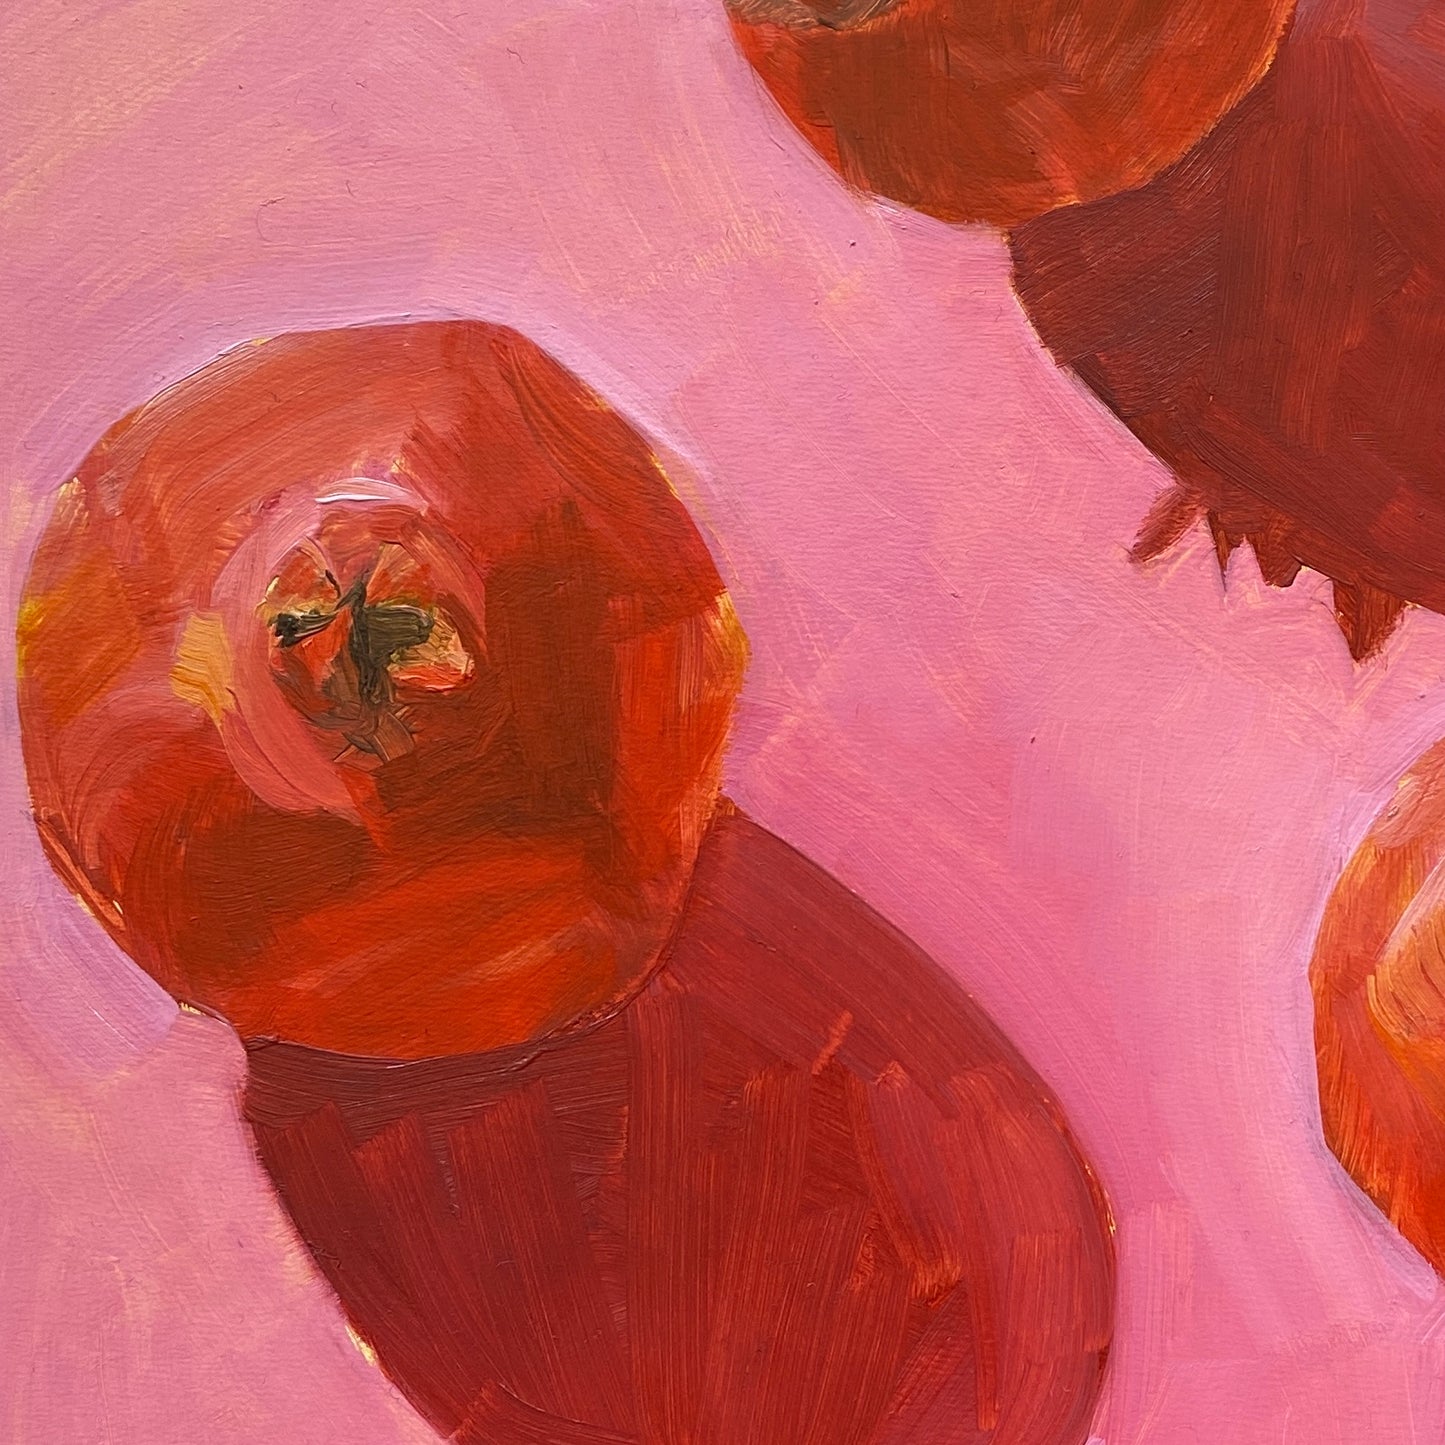 a close up of an image of an original oil painting on wooden panel of three red pomegranates on a bright pink background